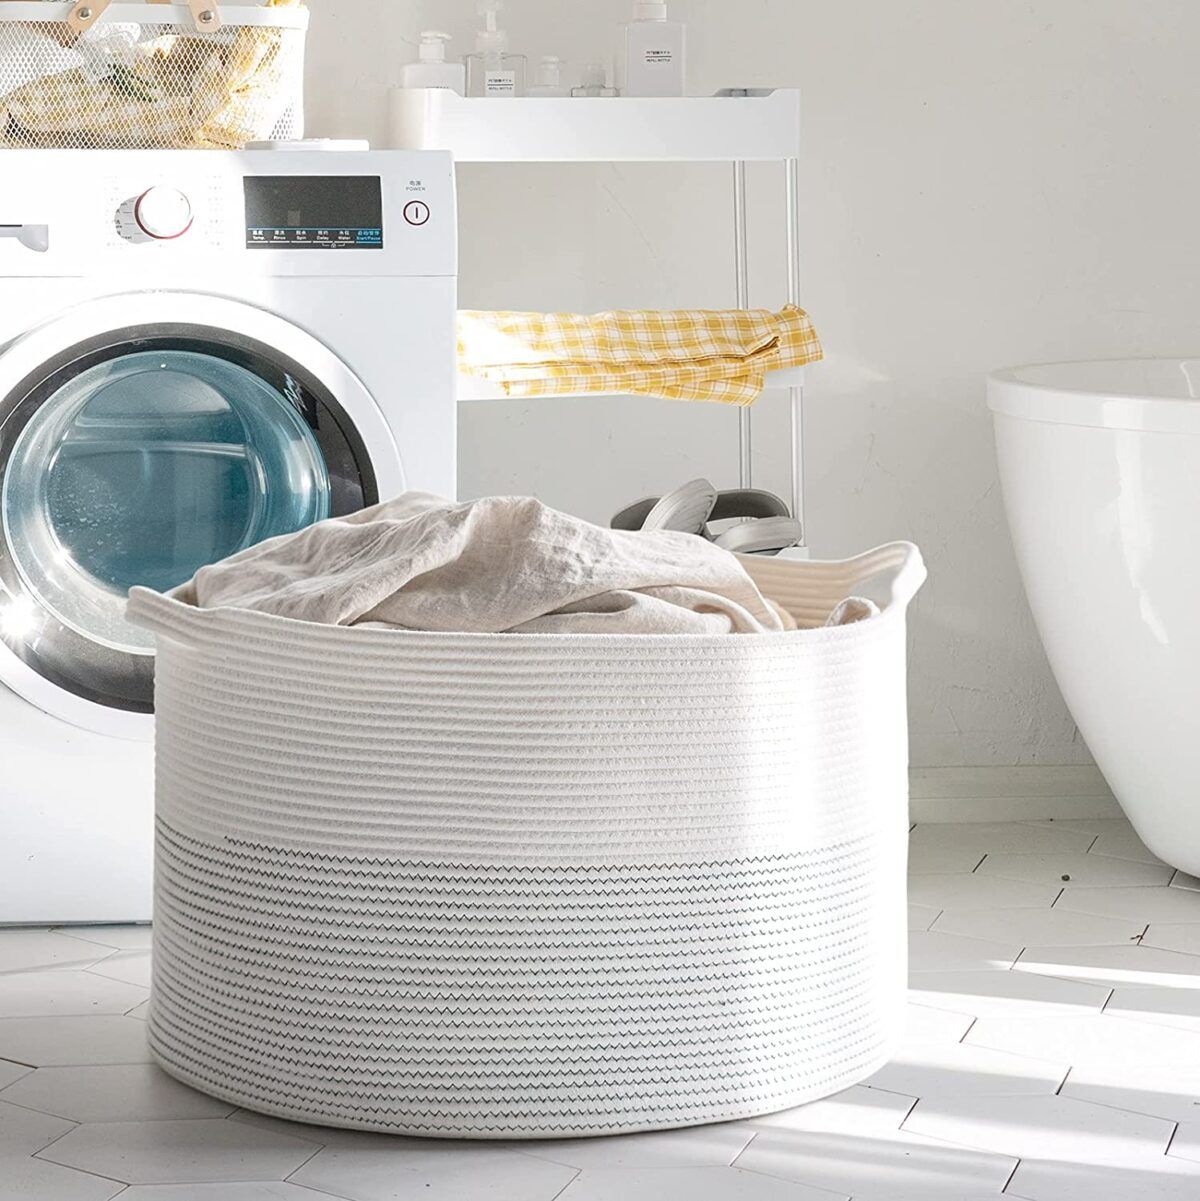 This genius gadget keeps clothes fresh between washes